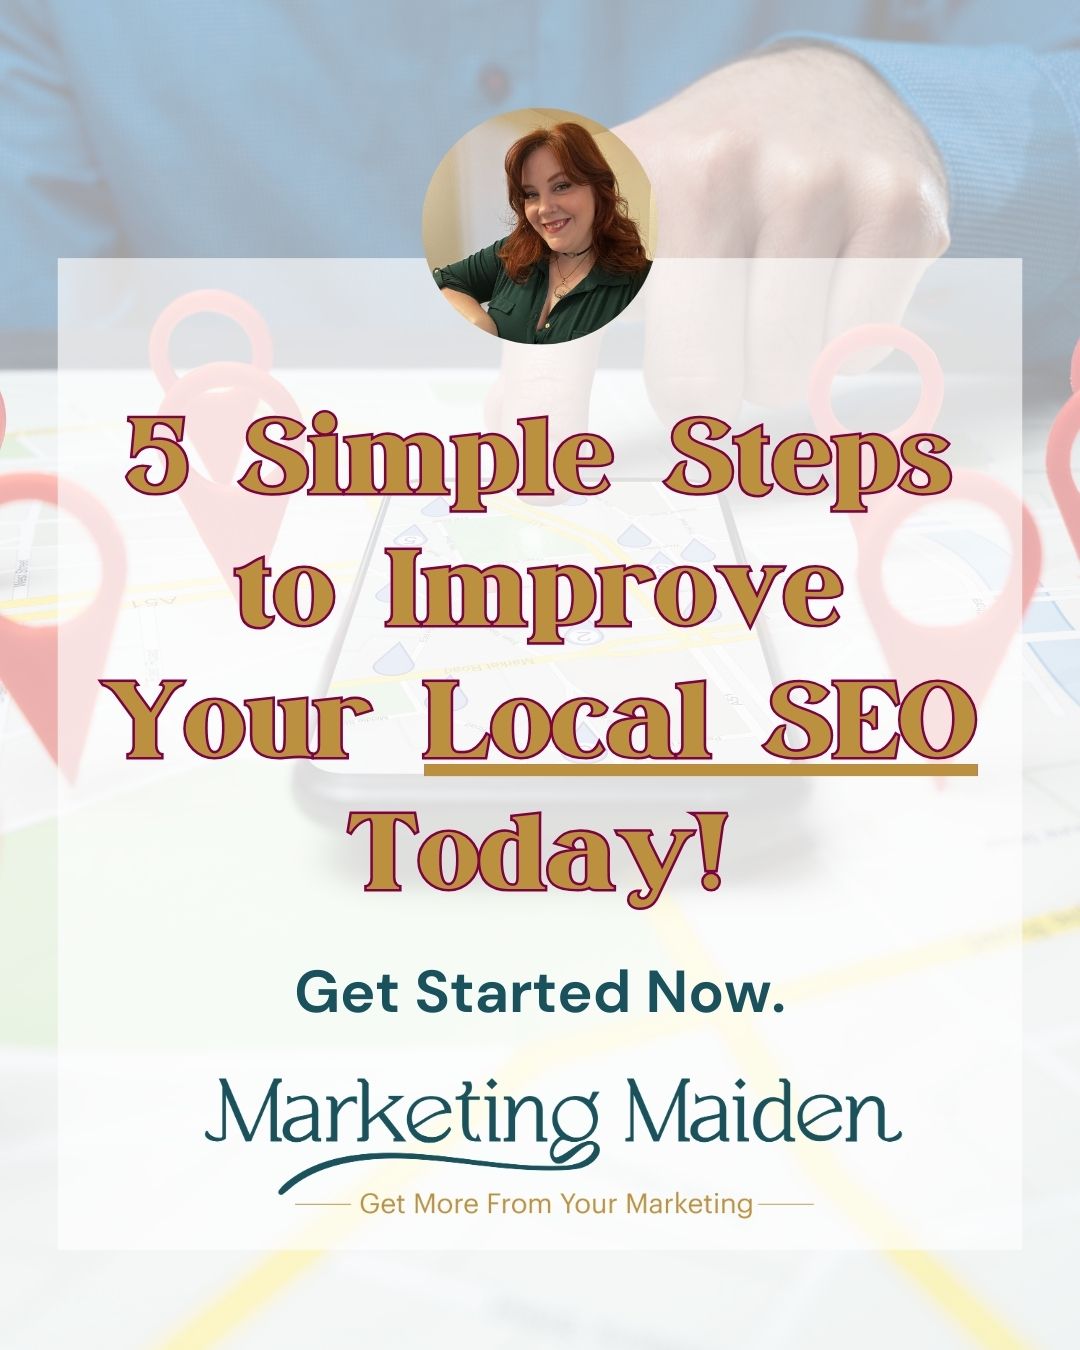 5 Simple Steps to Improve Your Local SEO Today